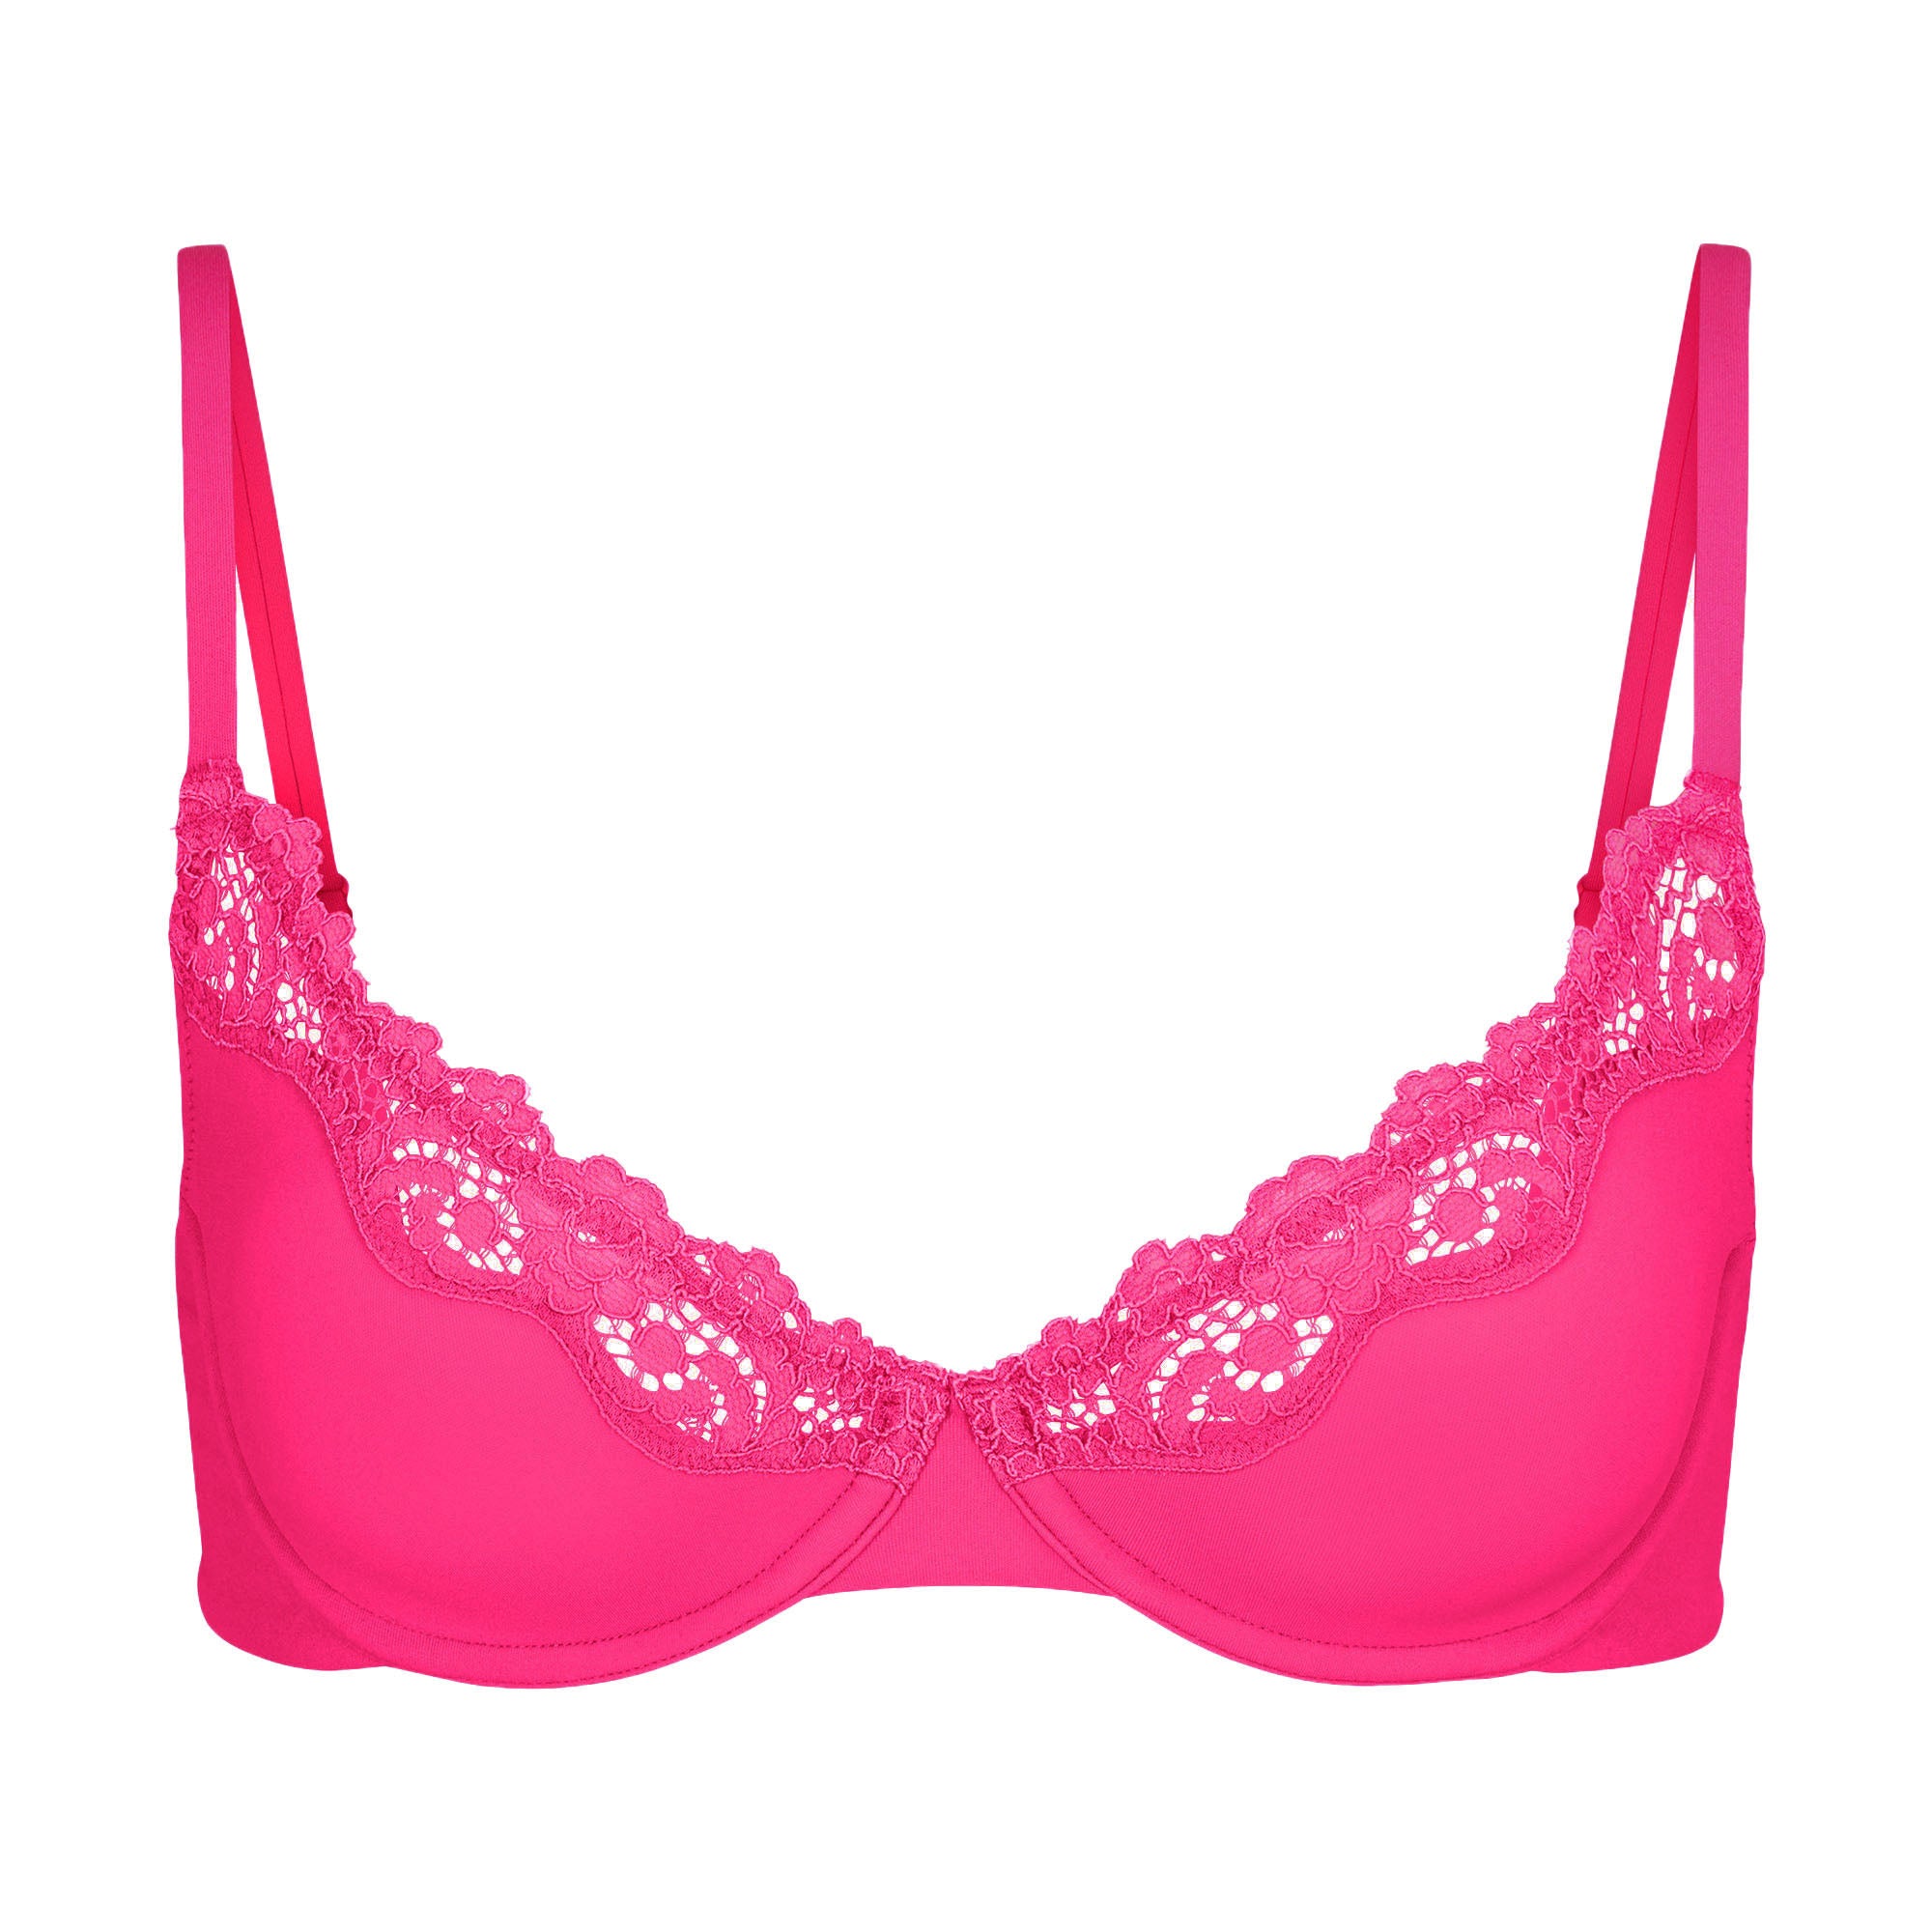 Track Fits Everybody Unlined Demi Bra - Cherry Blossom - 36 - C at